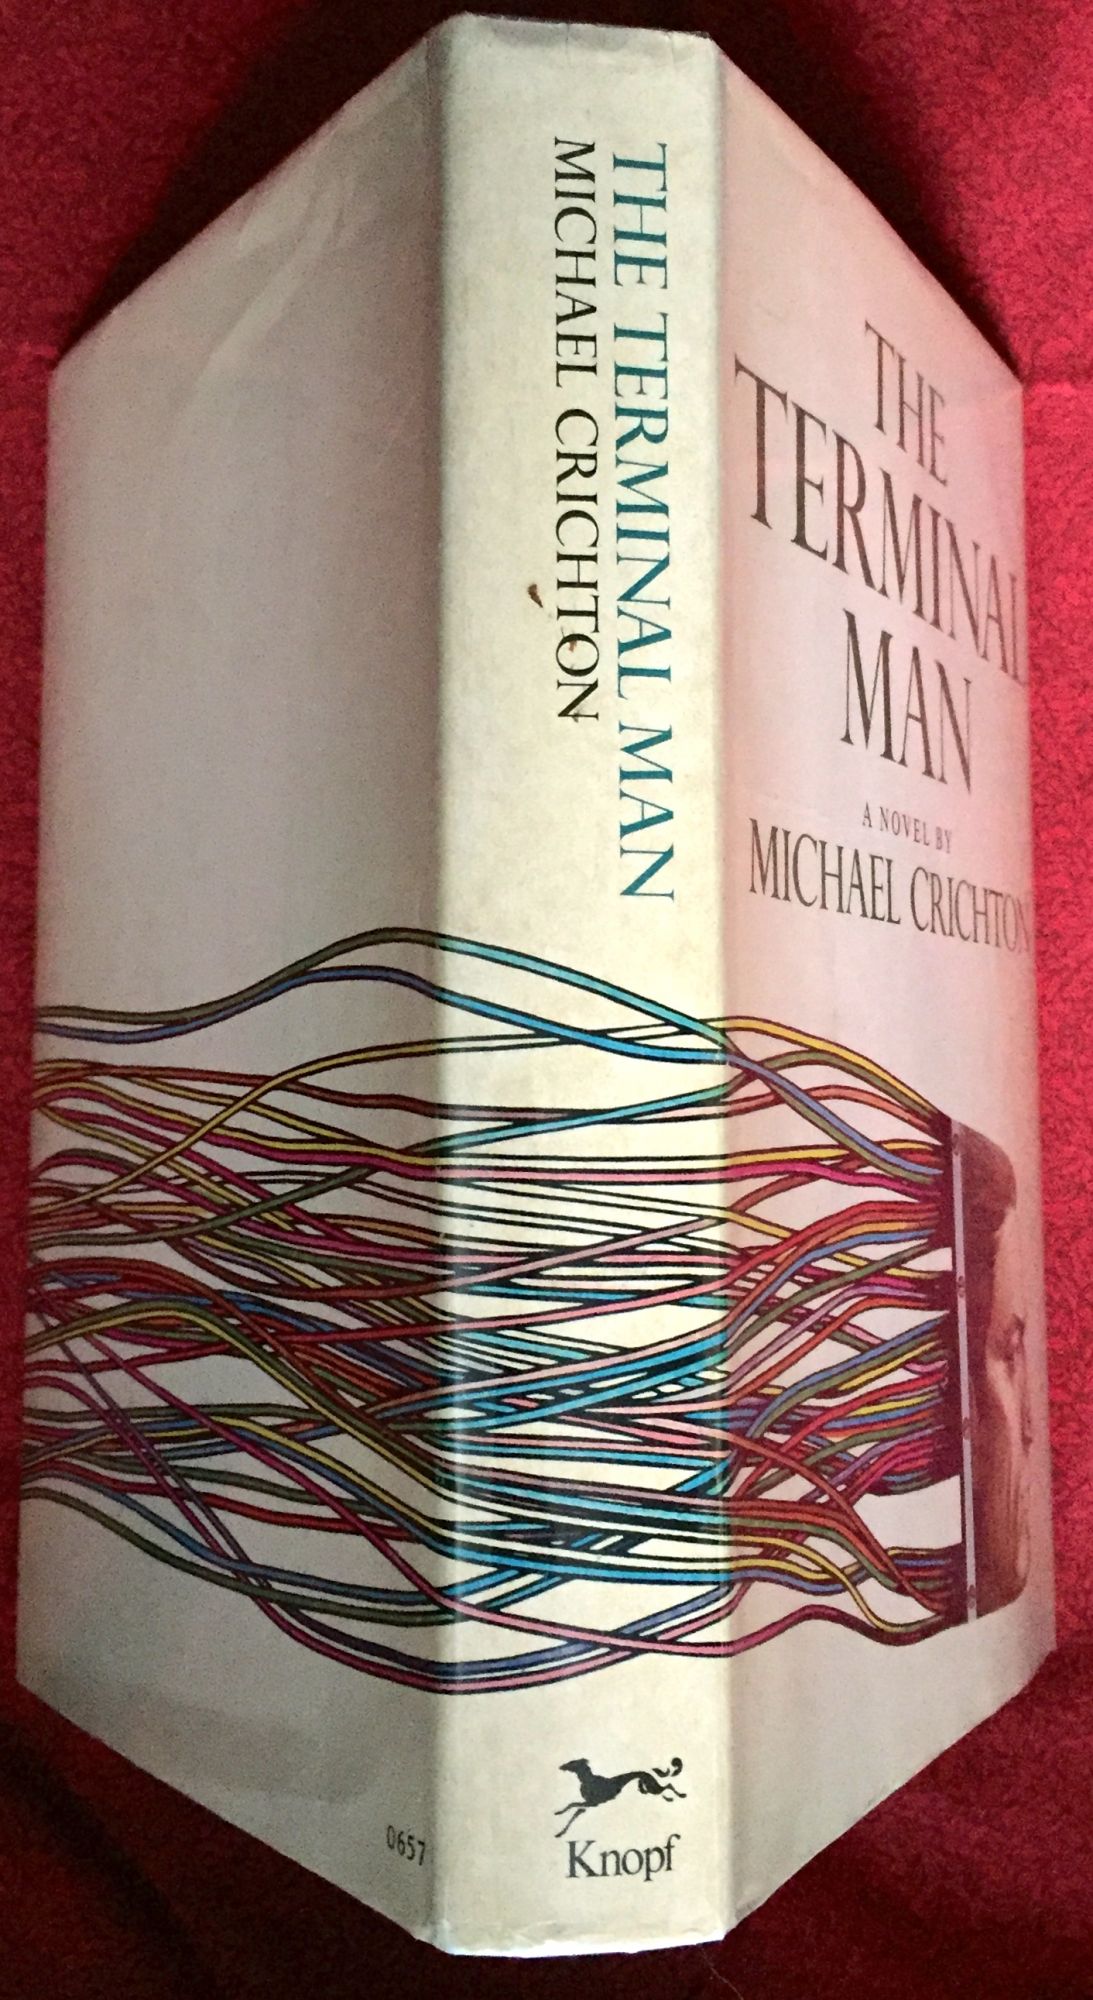 THE TERMINAL MAN (Signed 1st Printing)